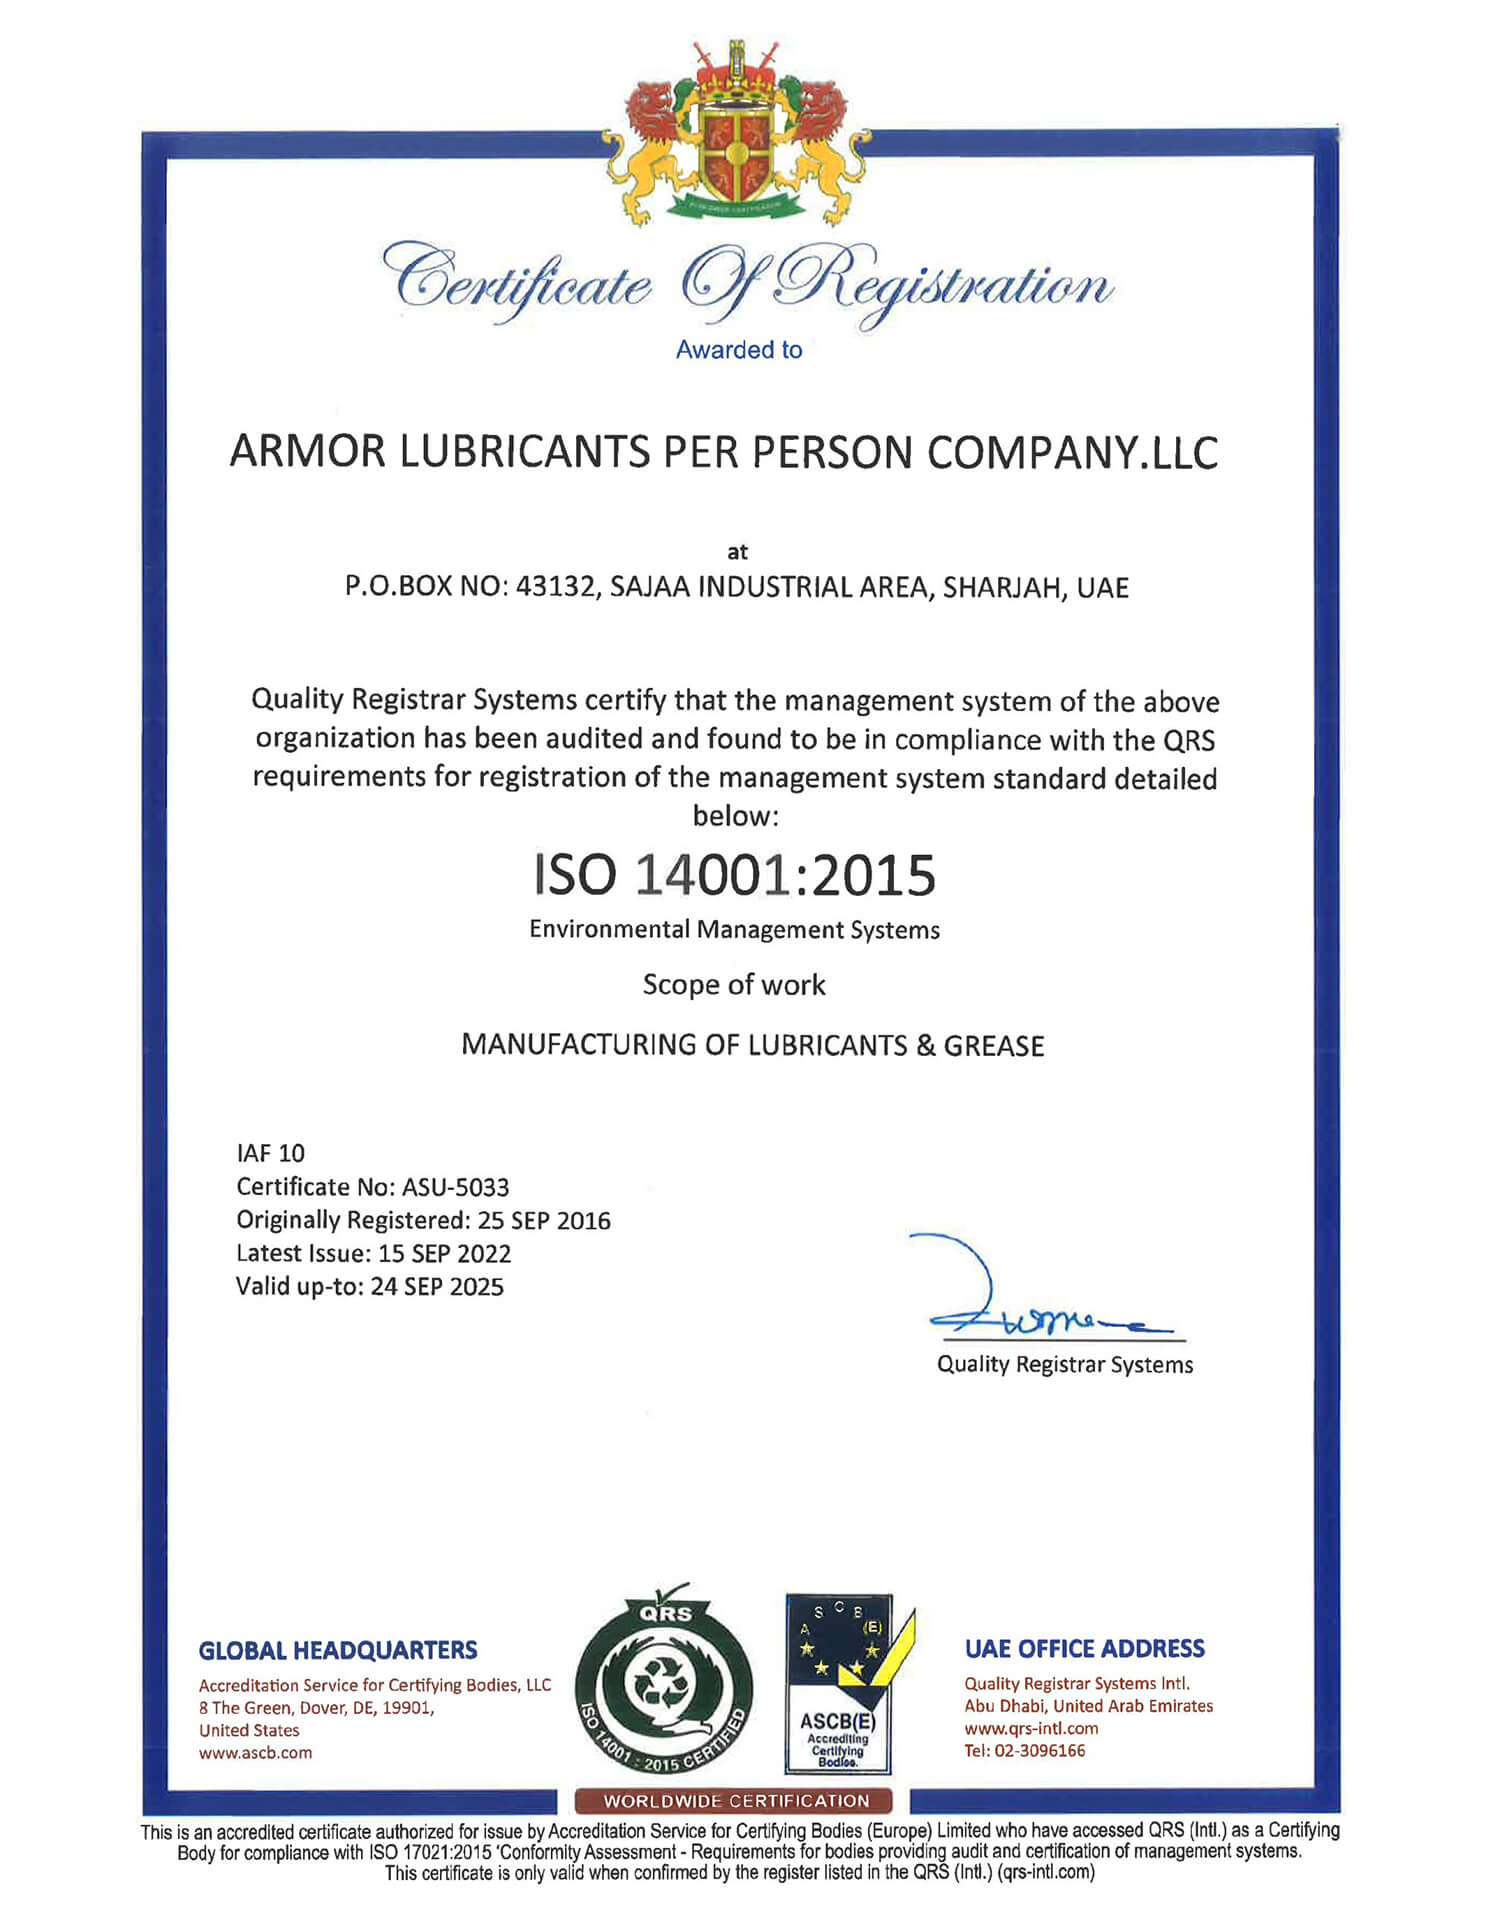 Armor Lubricants Awarded Certificate of Registration ISO 14001:2015